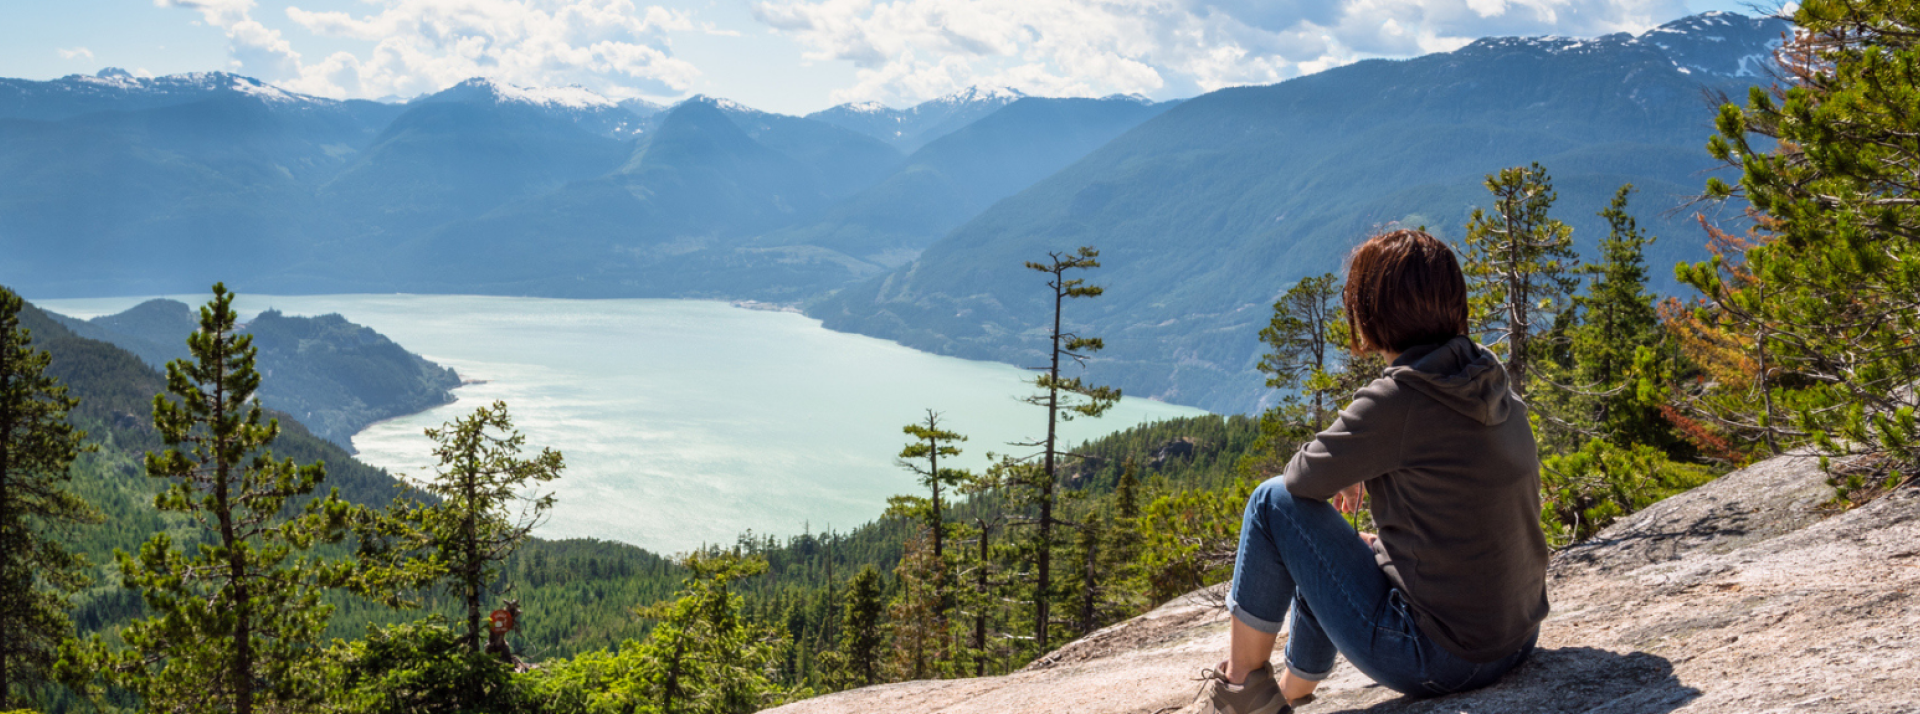 Person sitting on mountain in Squamish looking out at view of mountains and water below.